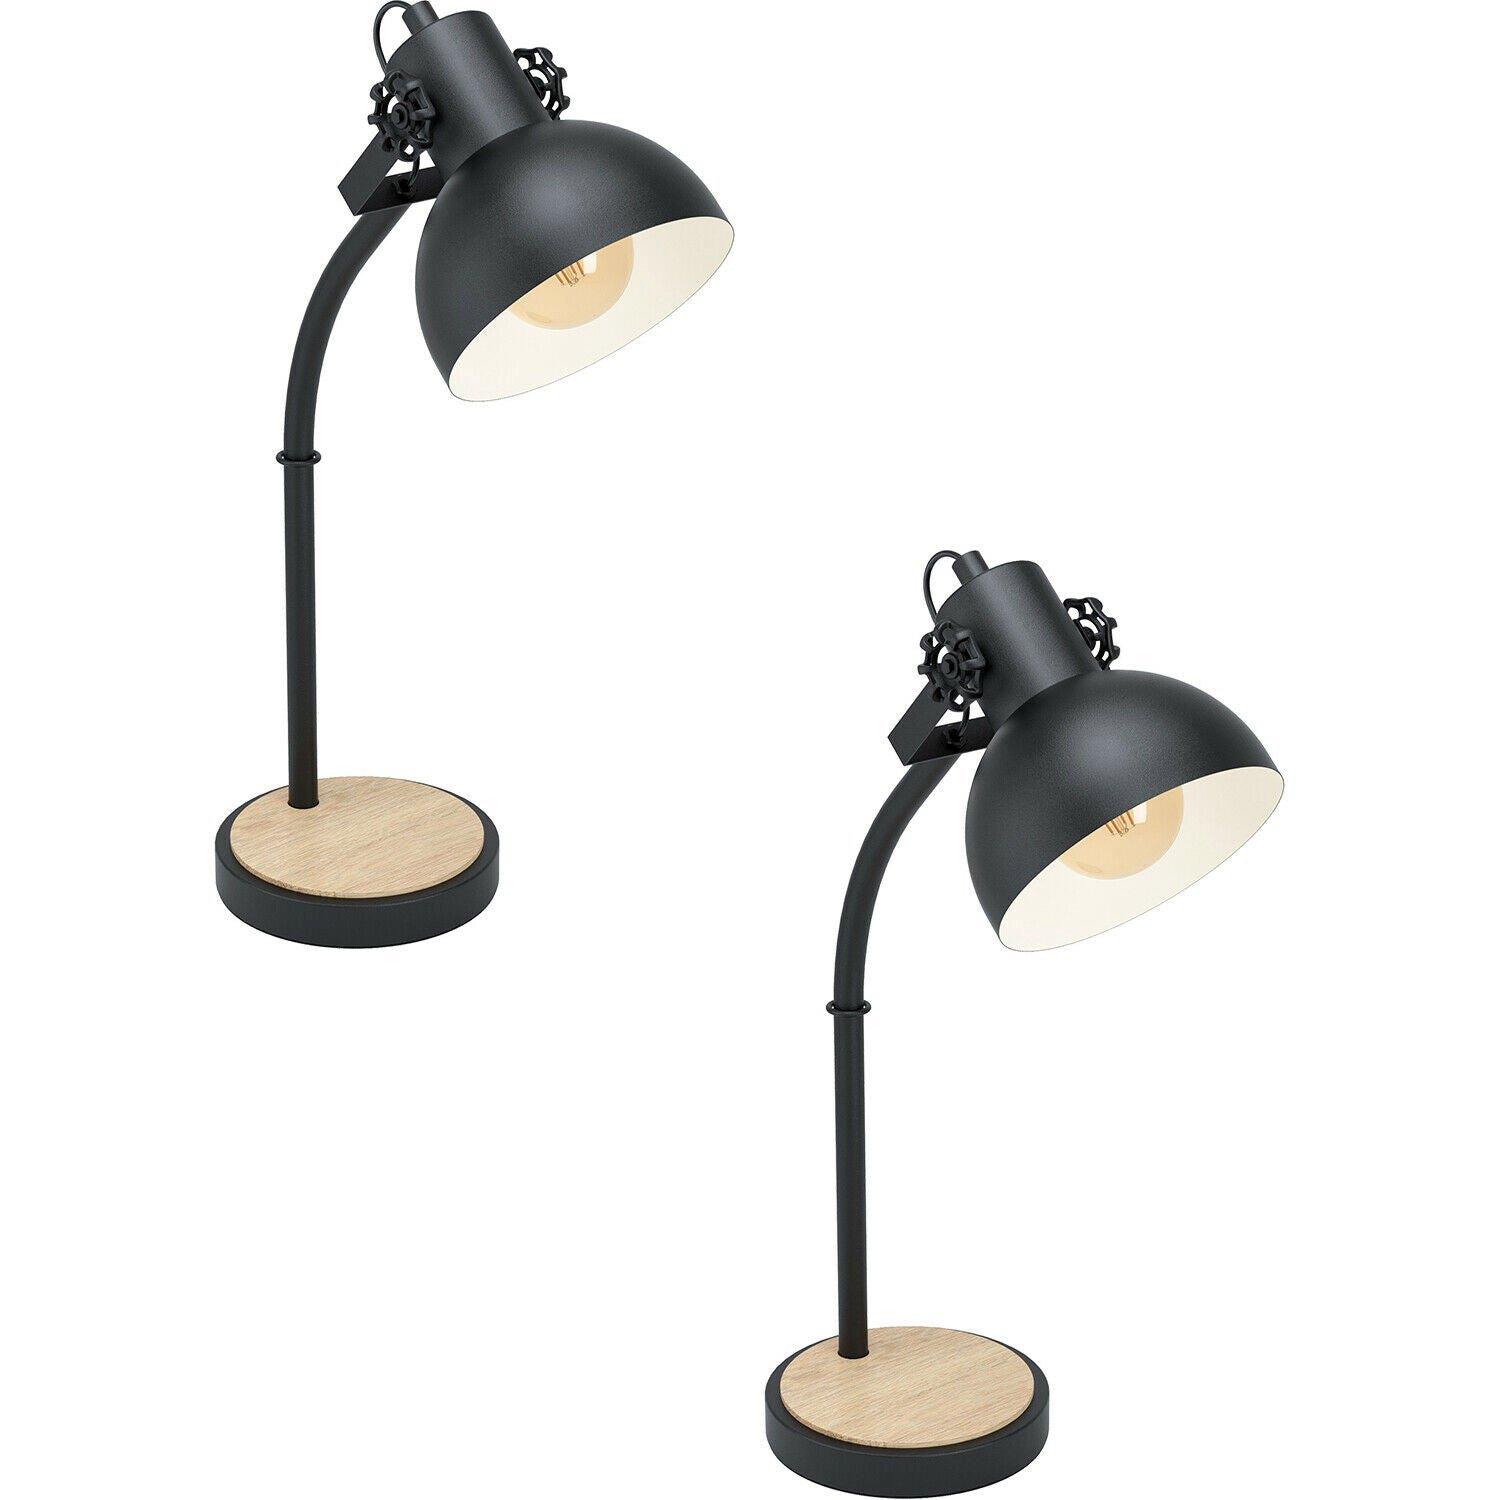 2 PACK Curved Table Lamp Desk Light Black Steel Shade & Wood Base 1x 28W E27